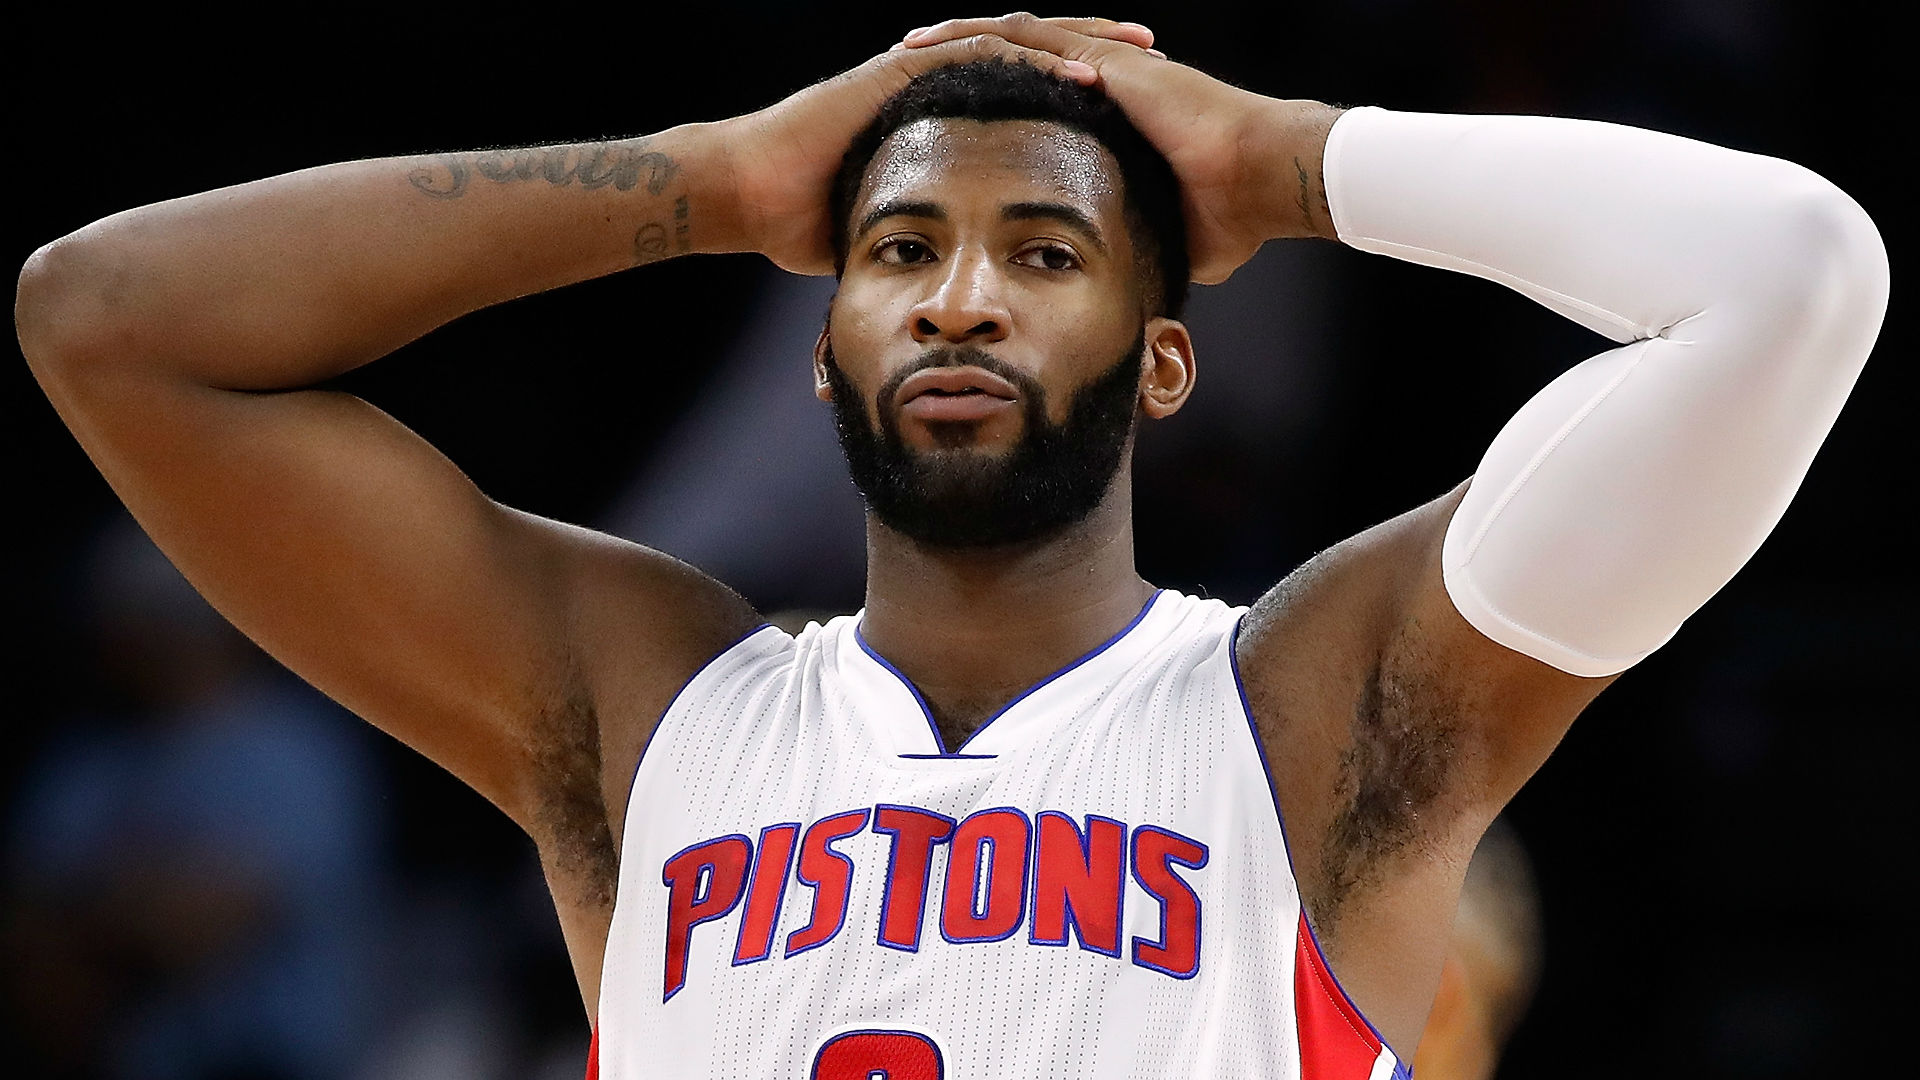 Pistons' Andre Drummond undergoes surgery to repair deviated septum | NBA | Sporting News